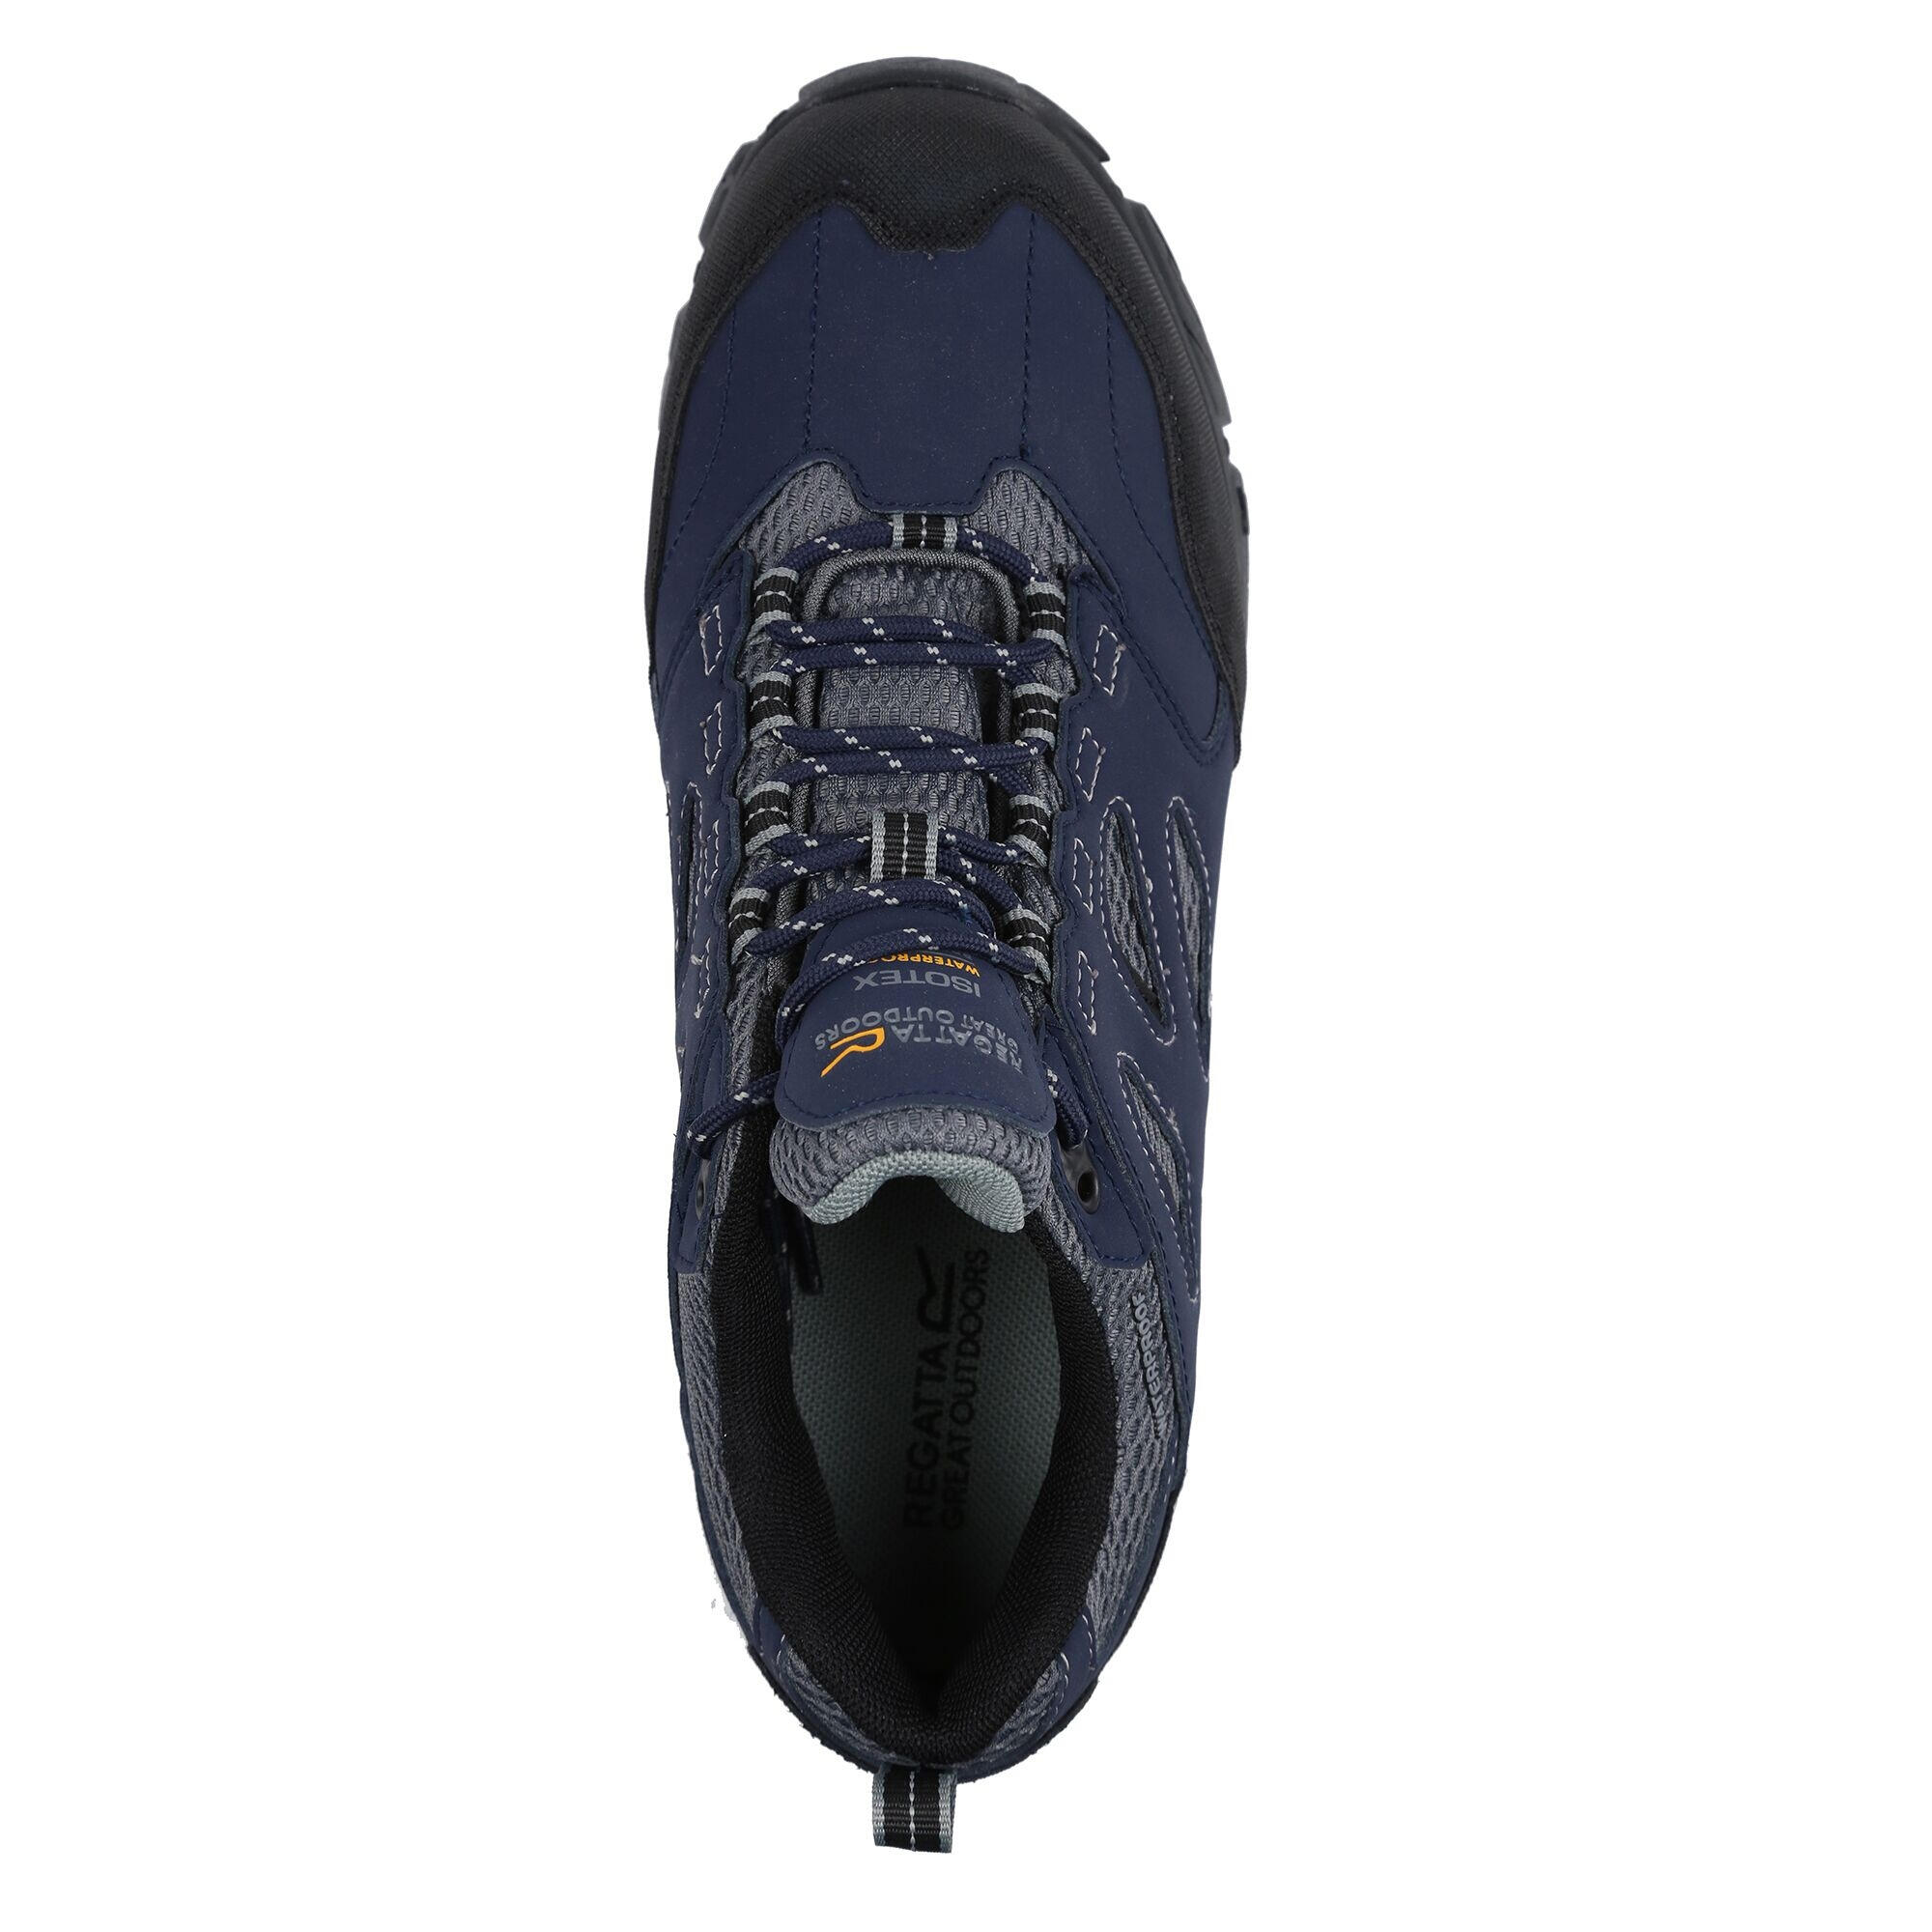 Mens Holcombe IEP Low Hiking Boots (Navy/Granite) 4/5